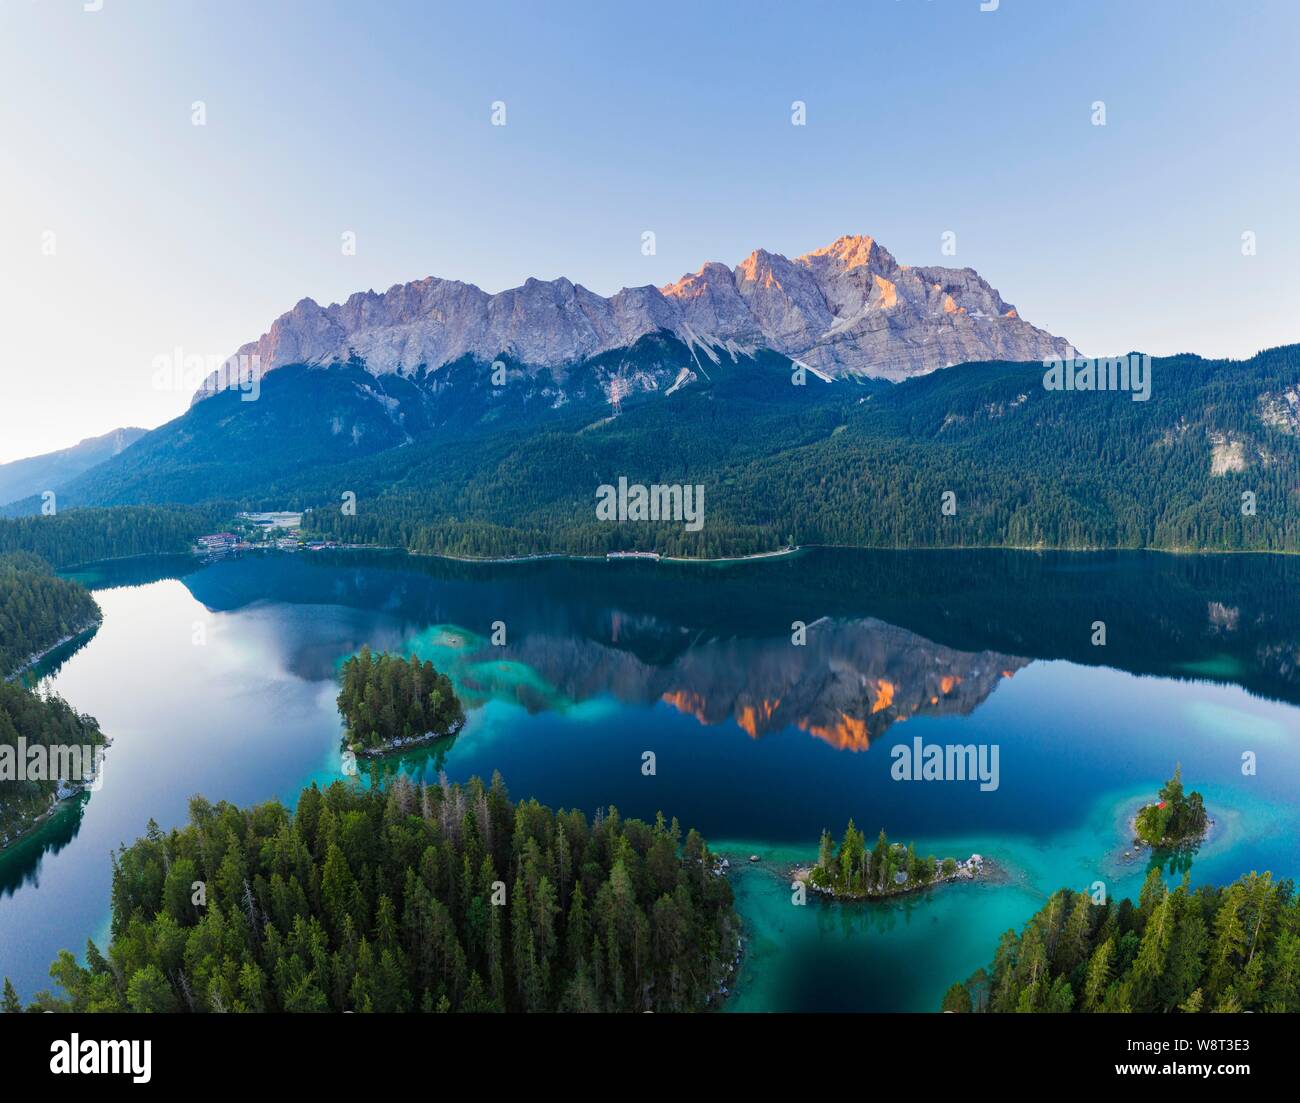 Eibsee lake with Wetterstein range and Zugspitze in the morning light, near Grainau, Werdenfelser Land, aerial view, Upper Bavaria, Bavaria, Germany Stock Photo